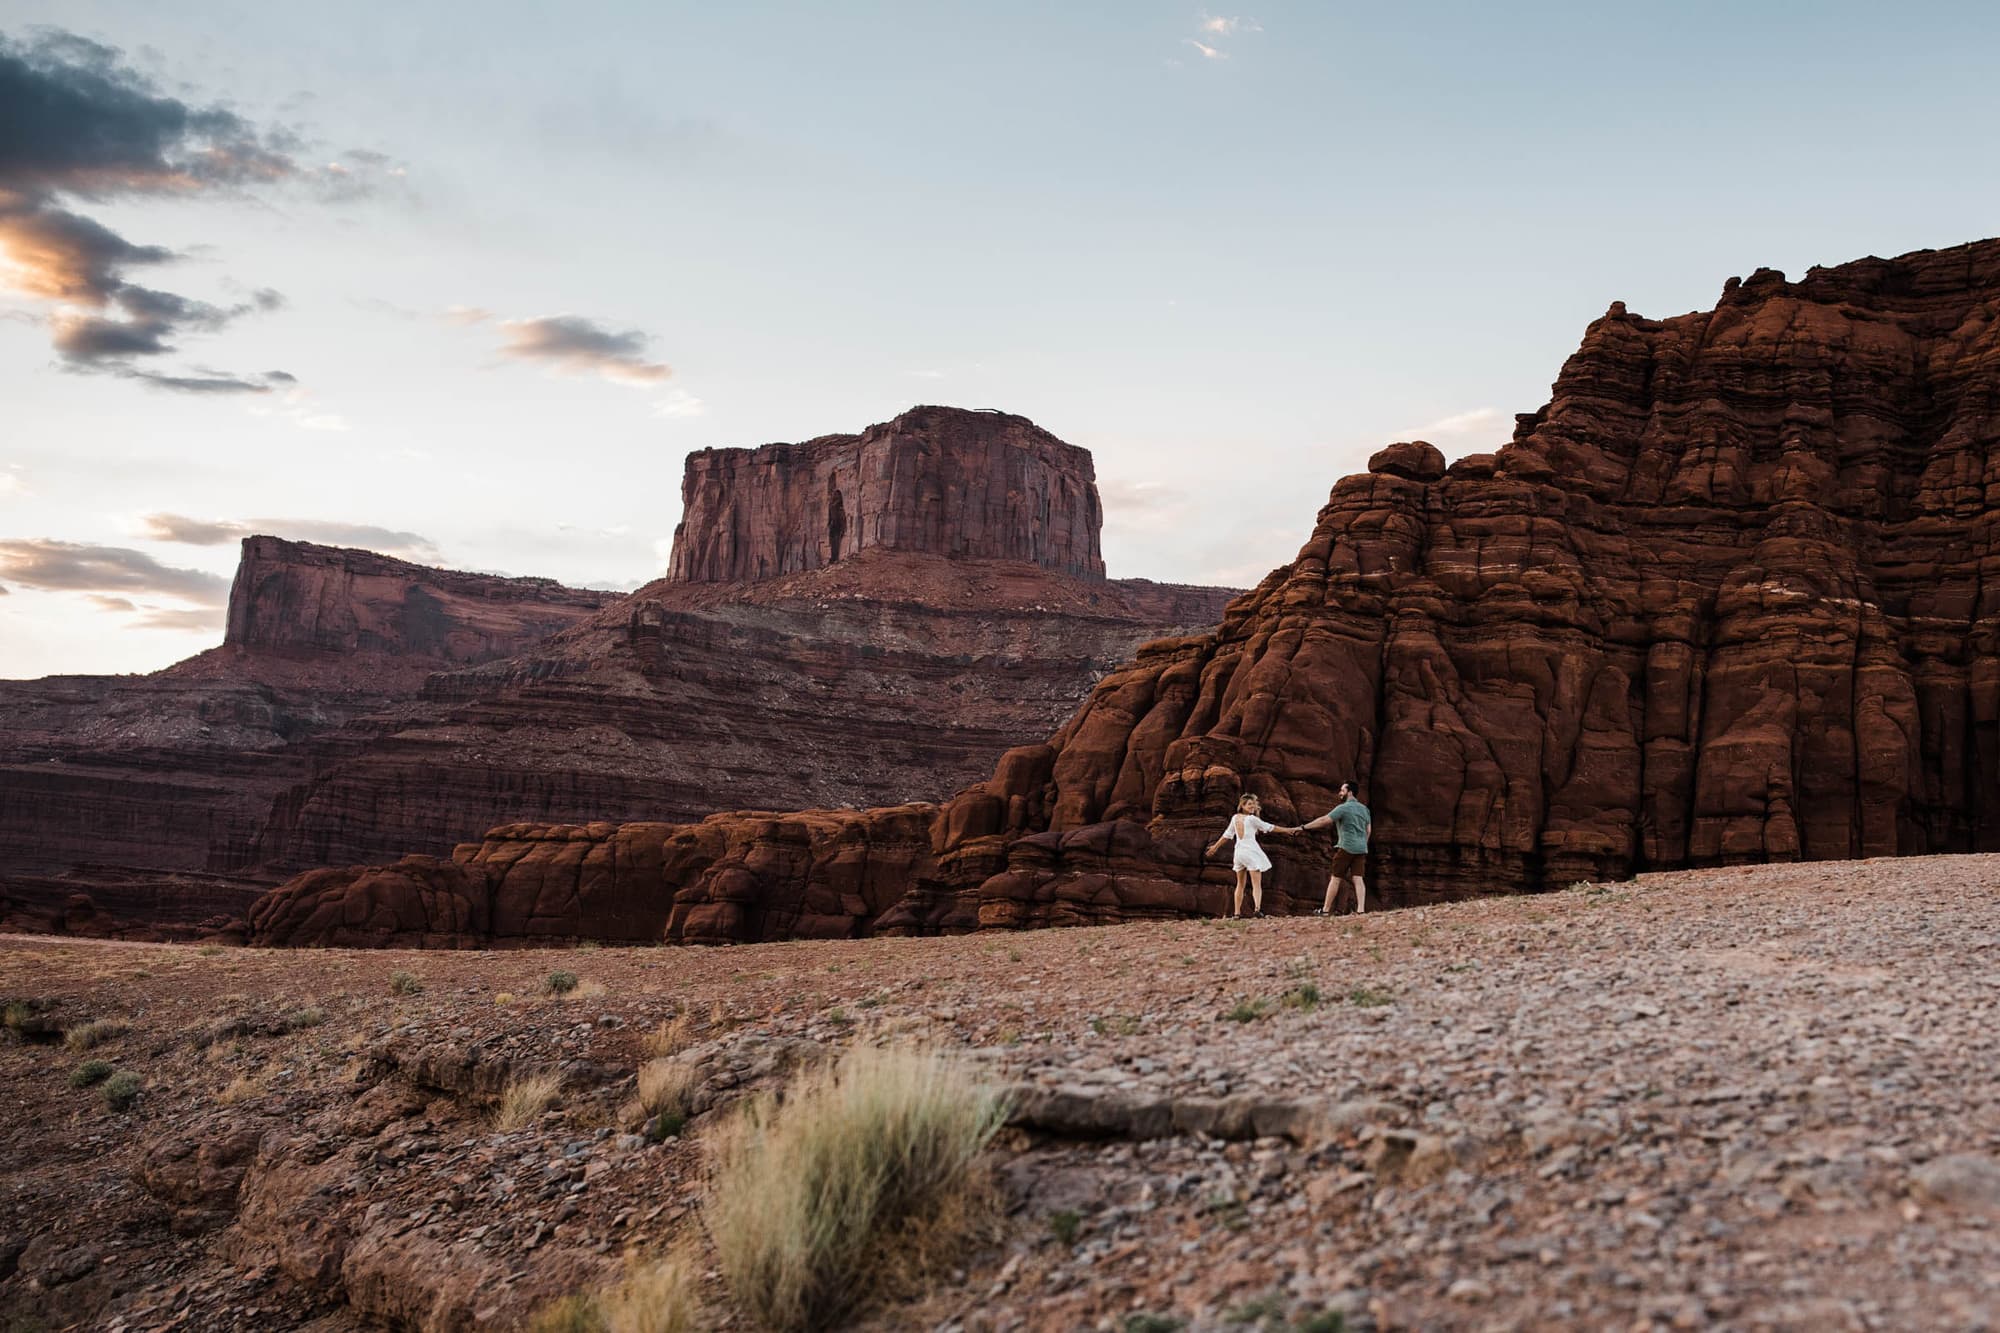 This Utah elopement is full of meaningful moments and will seriously tug at your heartstrings. And there's plenty of 4x4 adventure, too!